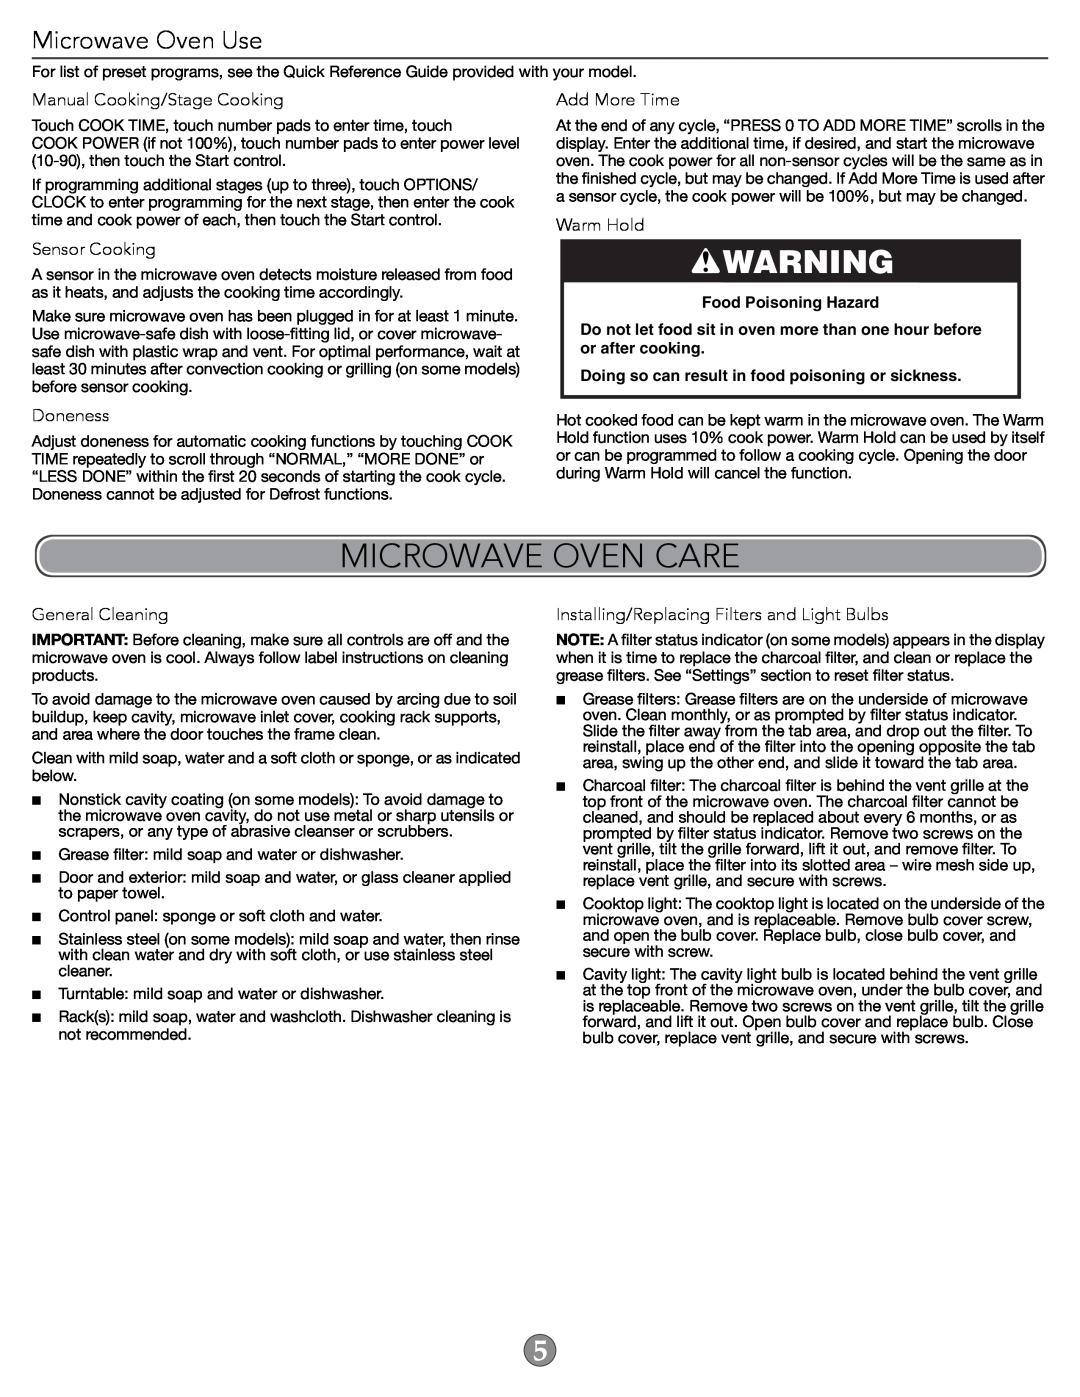 KitchenAid W10644749A important safety instructions Microwave Oven Care, Microwave Oven Use, Food Poisoning Hazard 